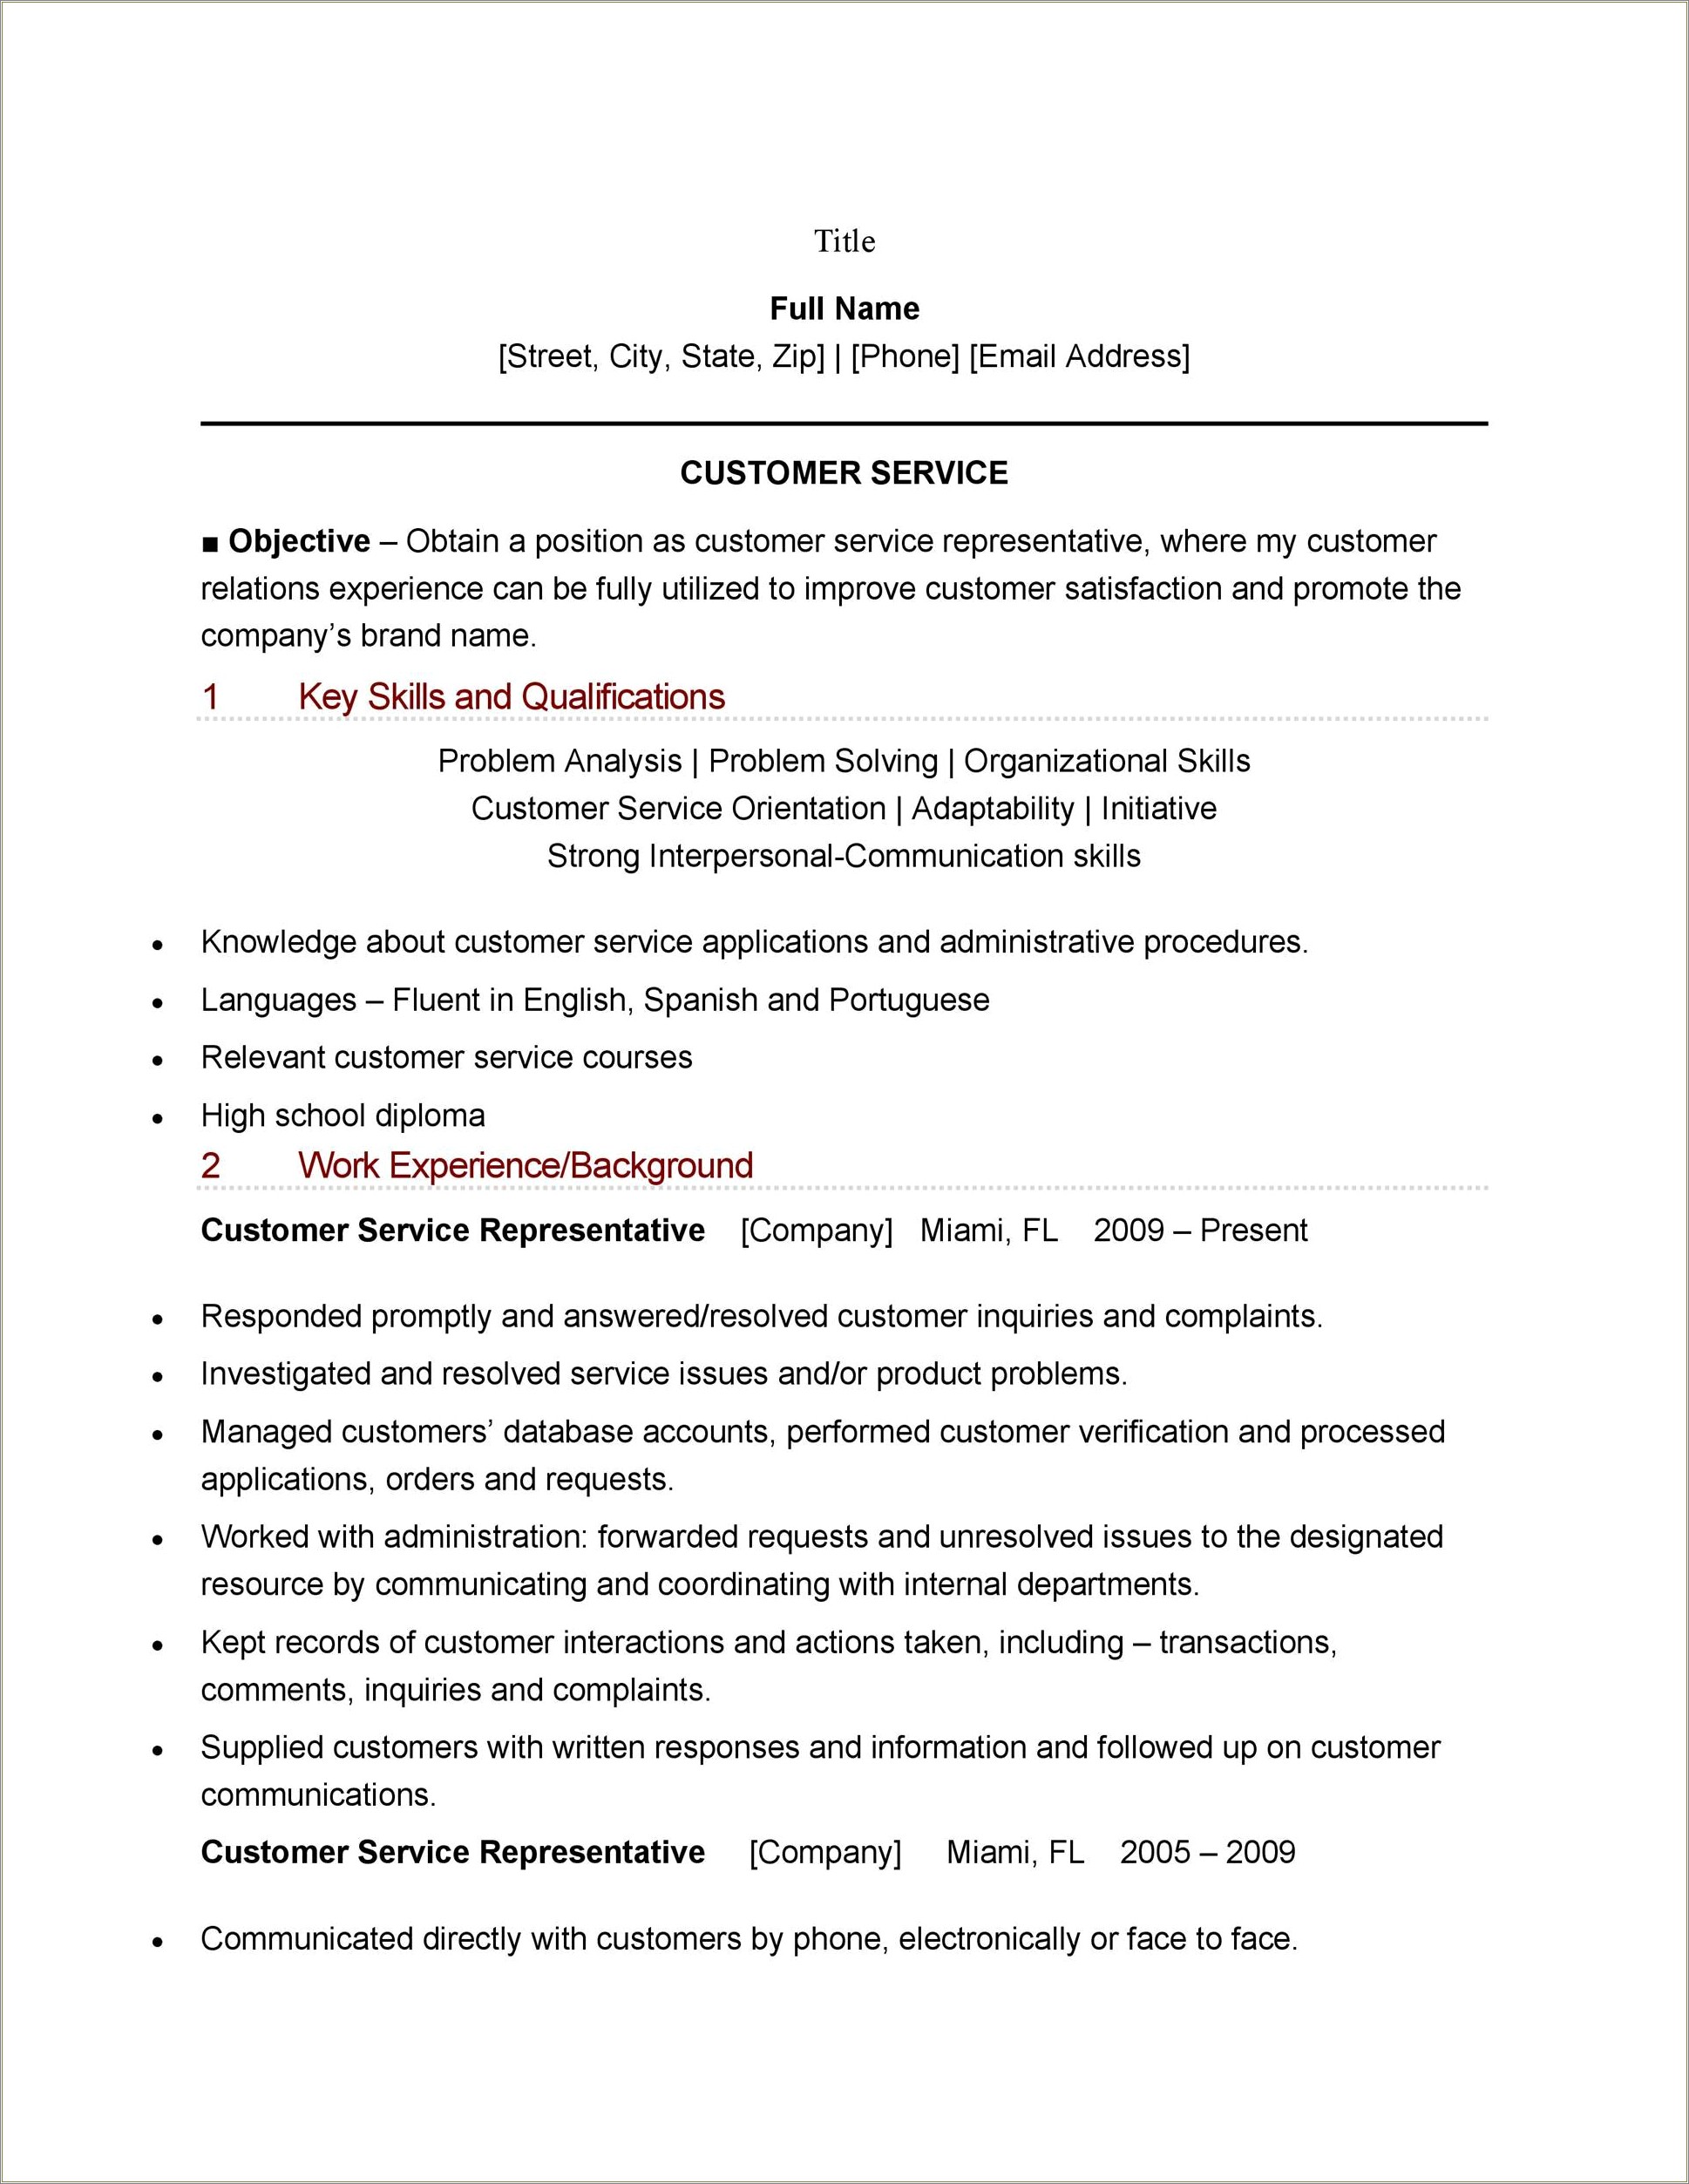 Example Of A Professional Customer Service Resume